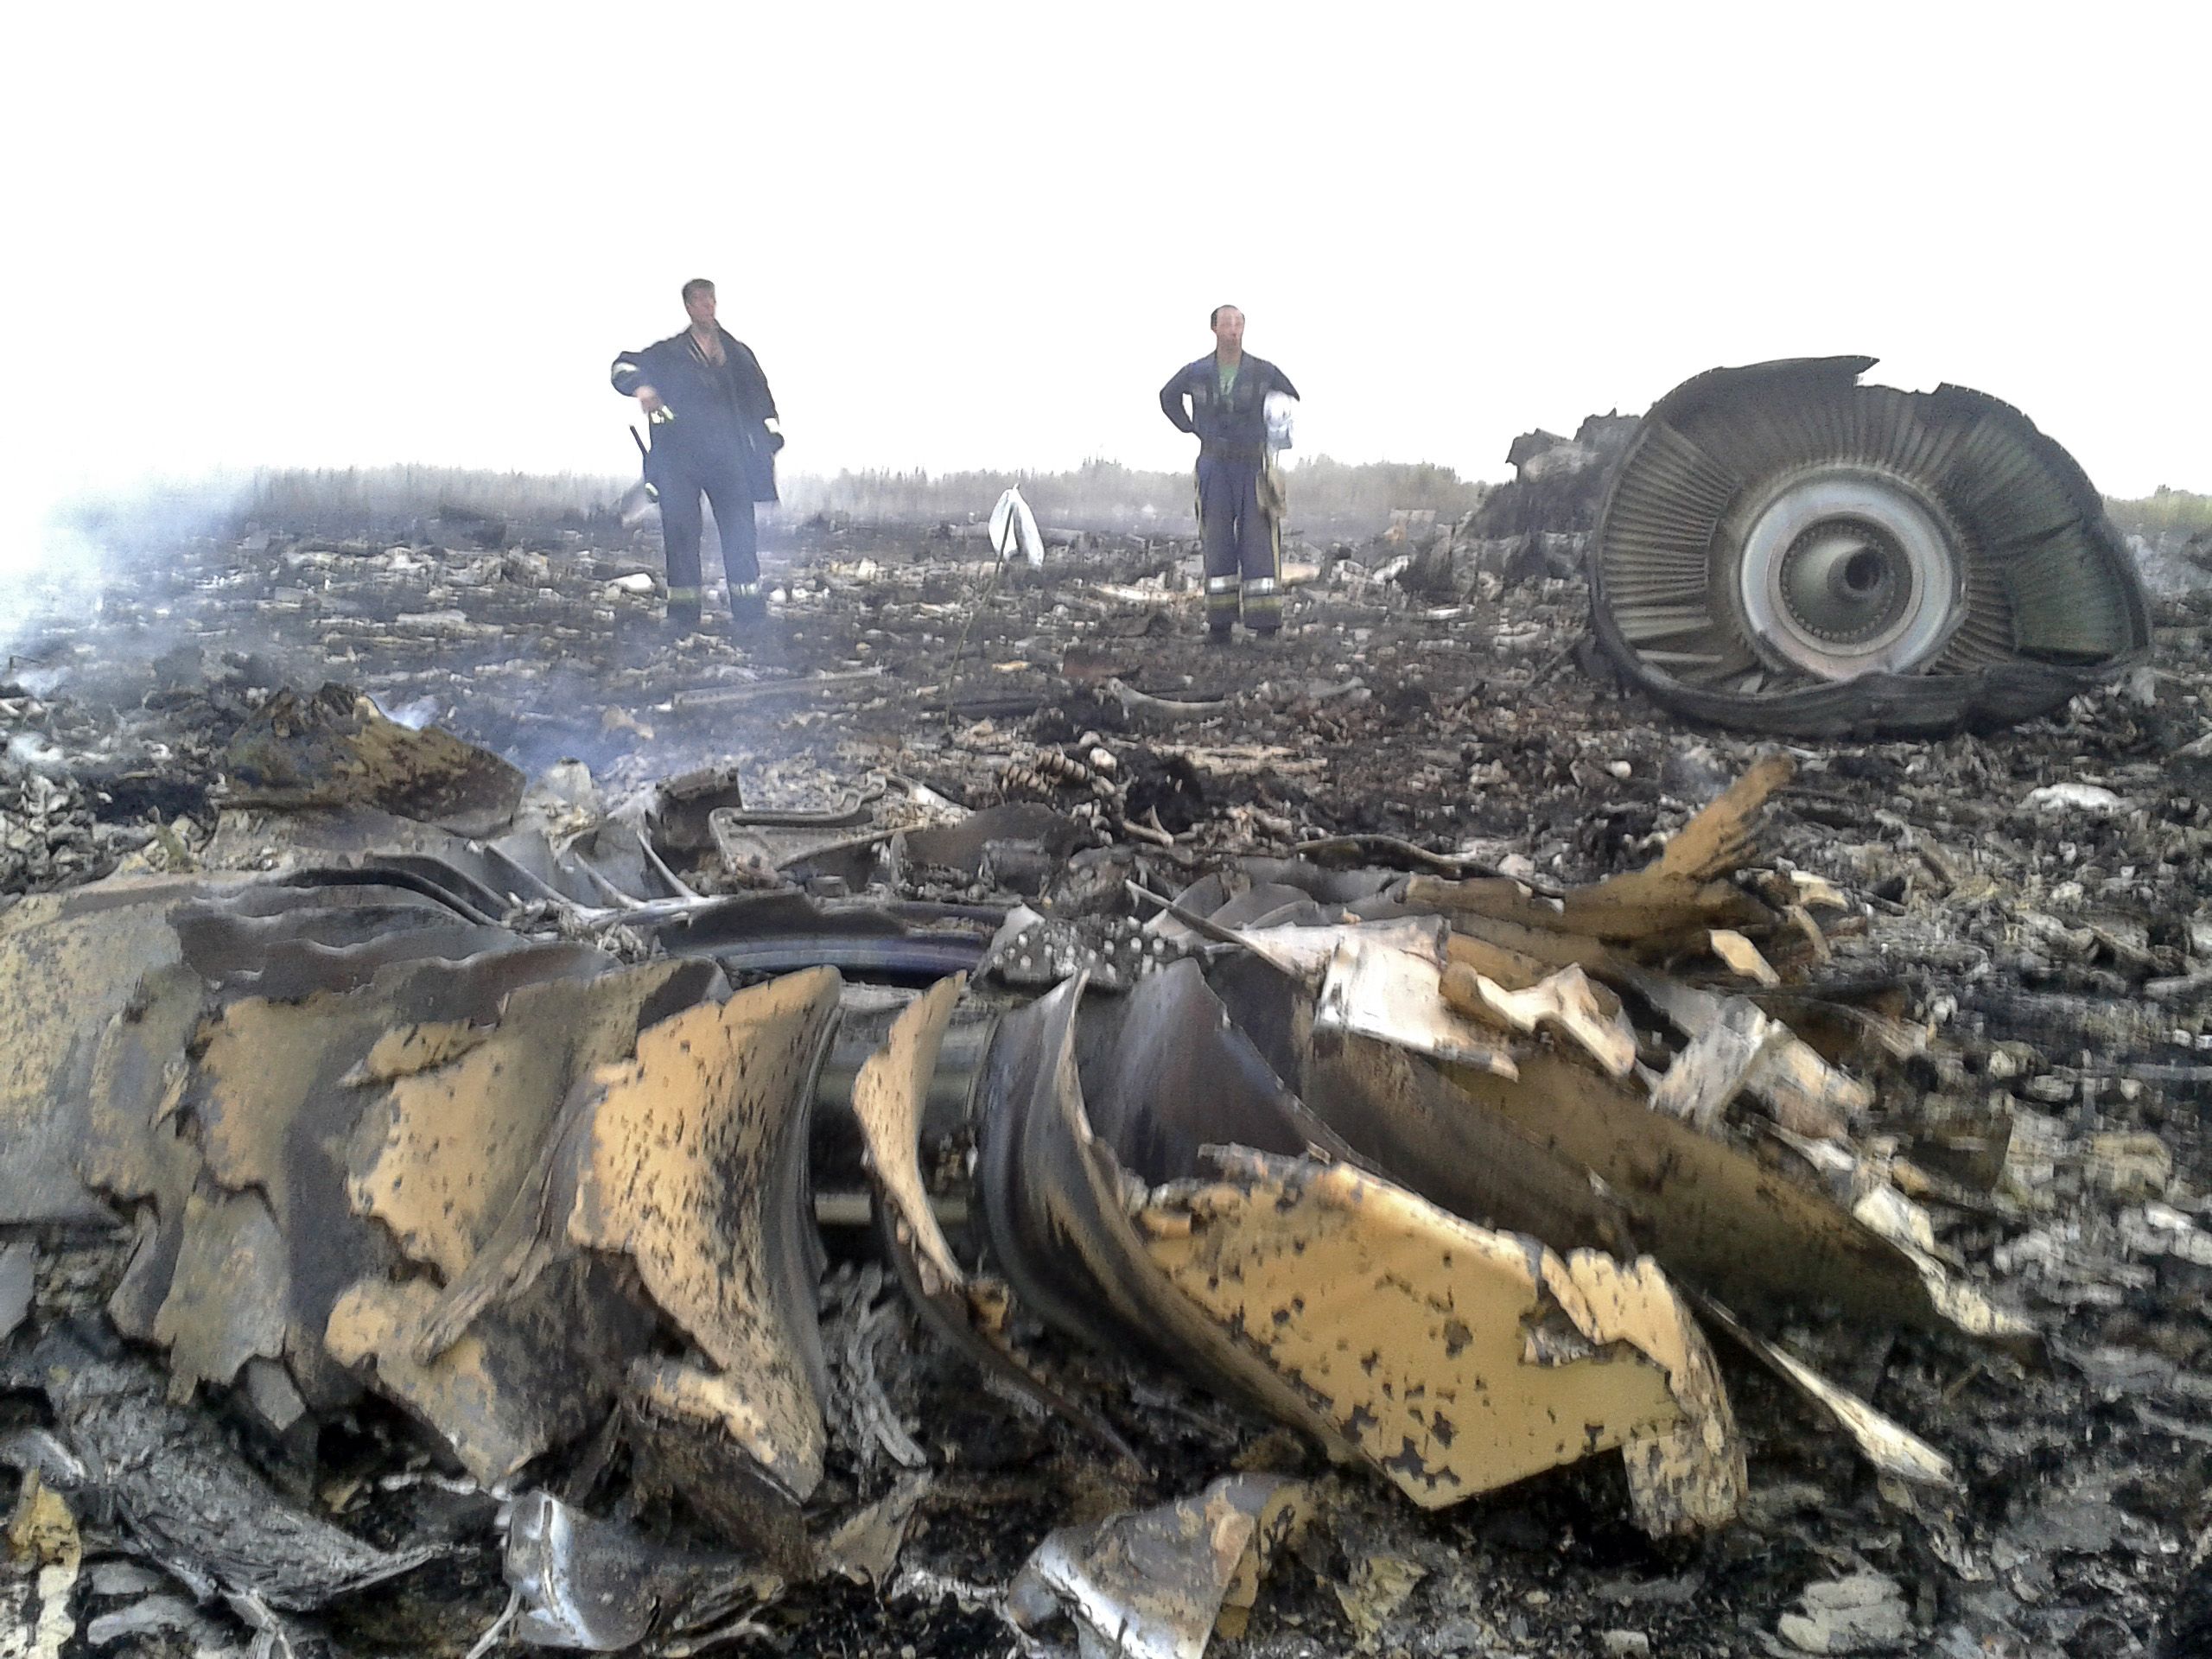 Malaysia Airlines Flight 17 Plane with 295 on board shot down in